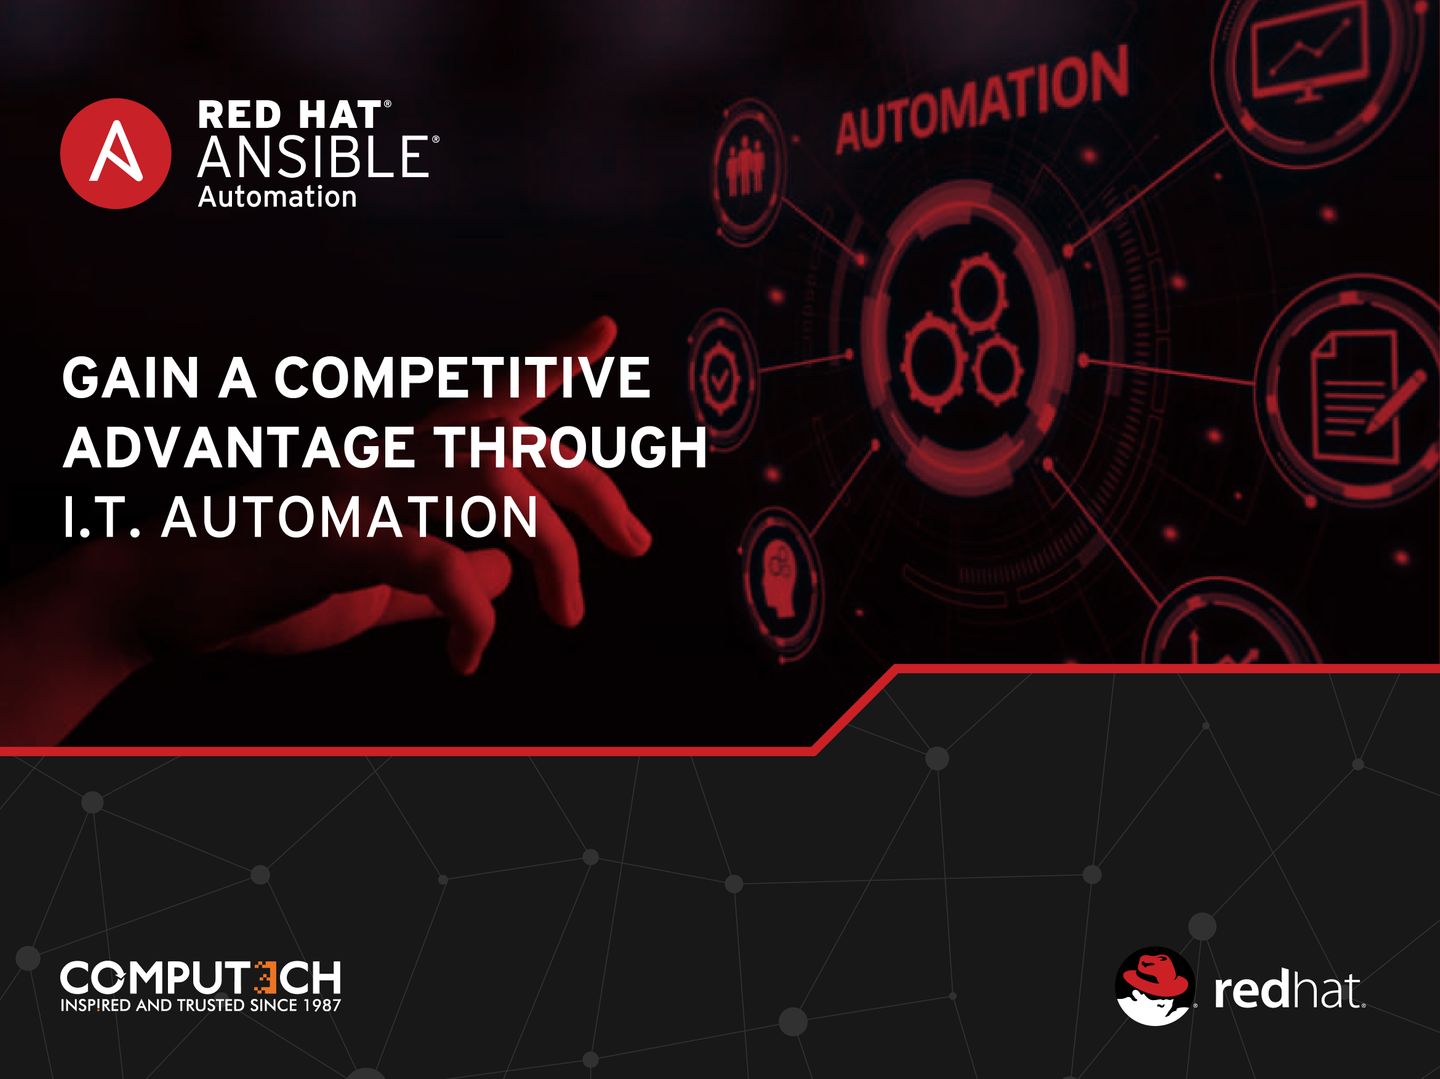 Gain a Competitive Edge Through I.T. Automation with Red Hat Ansible